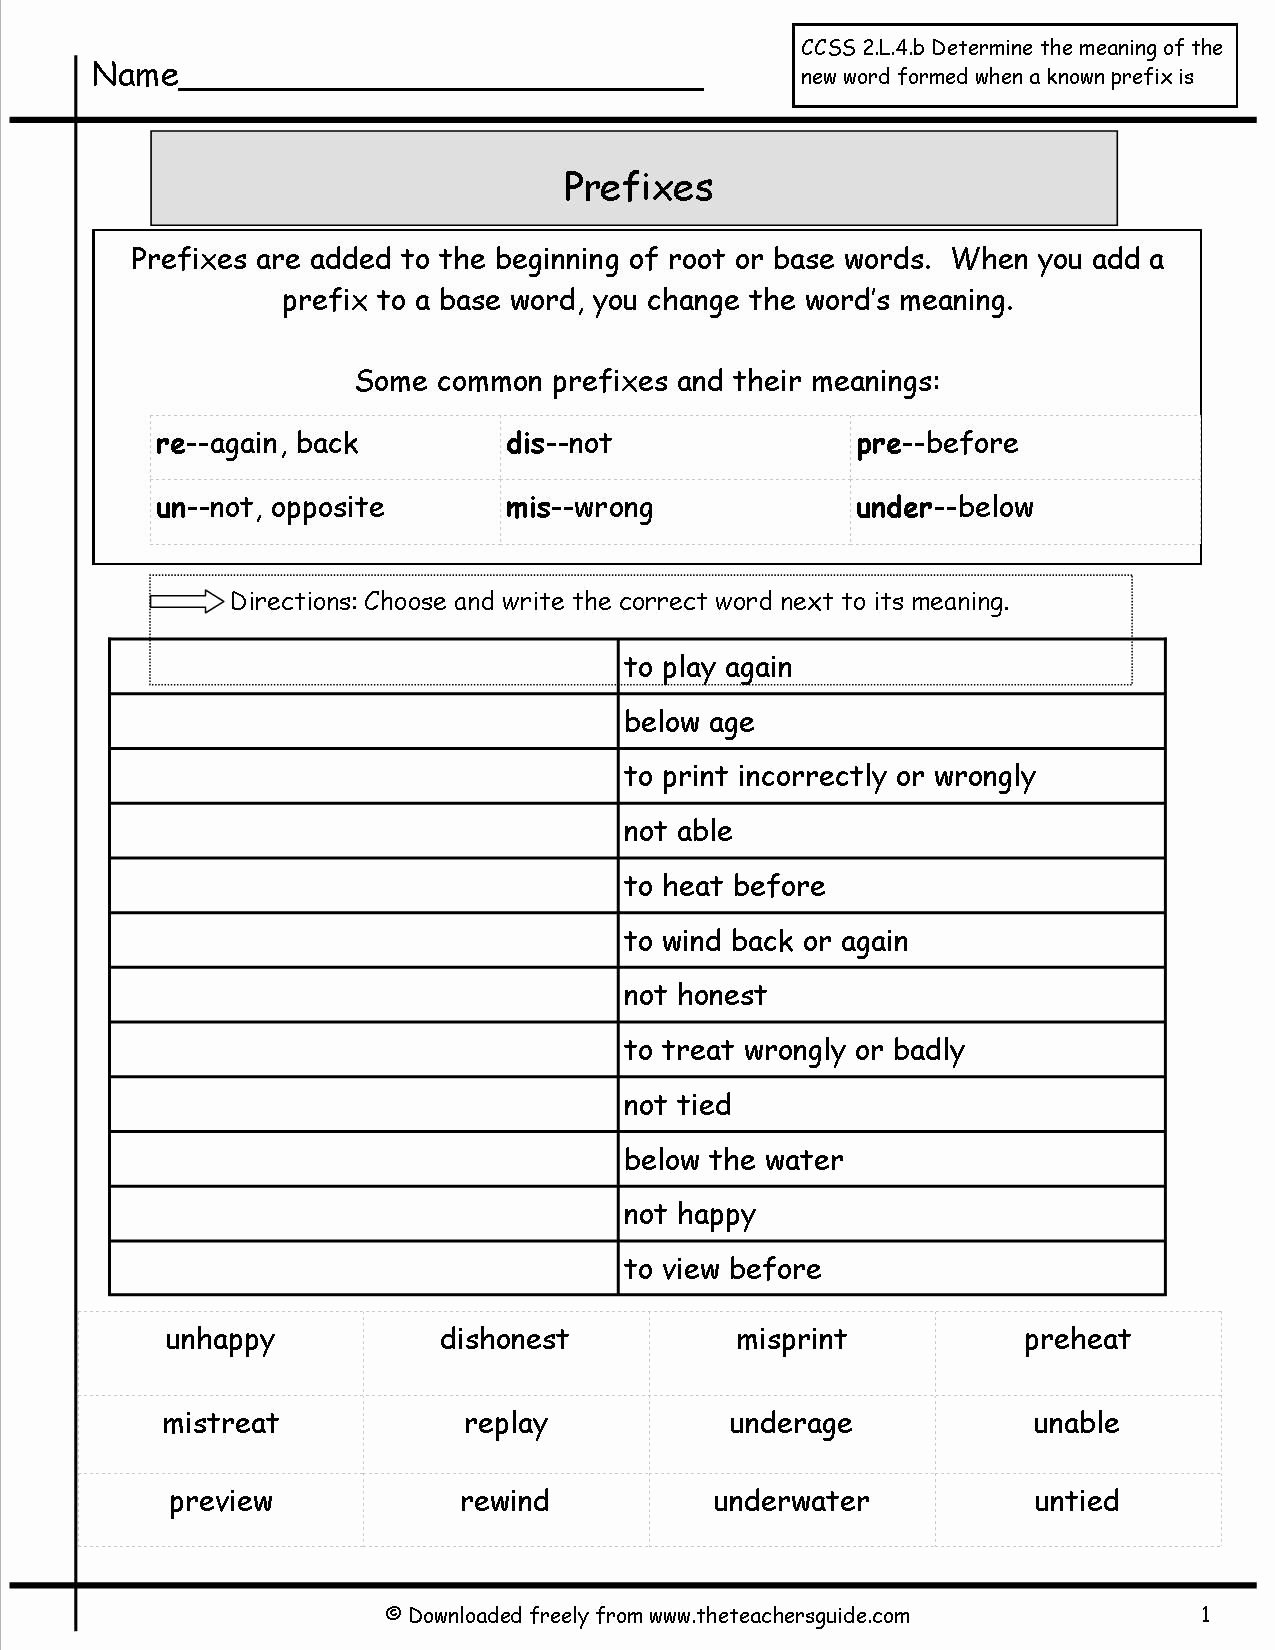 Prefixes and Suffixes Worksheet New Pin by Ana Vanover On Affixes